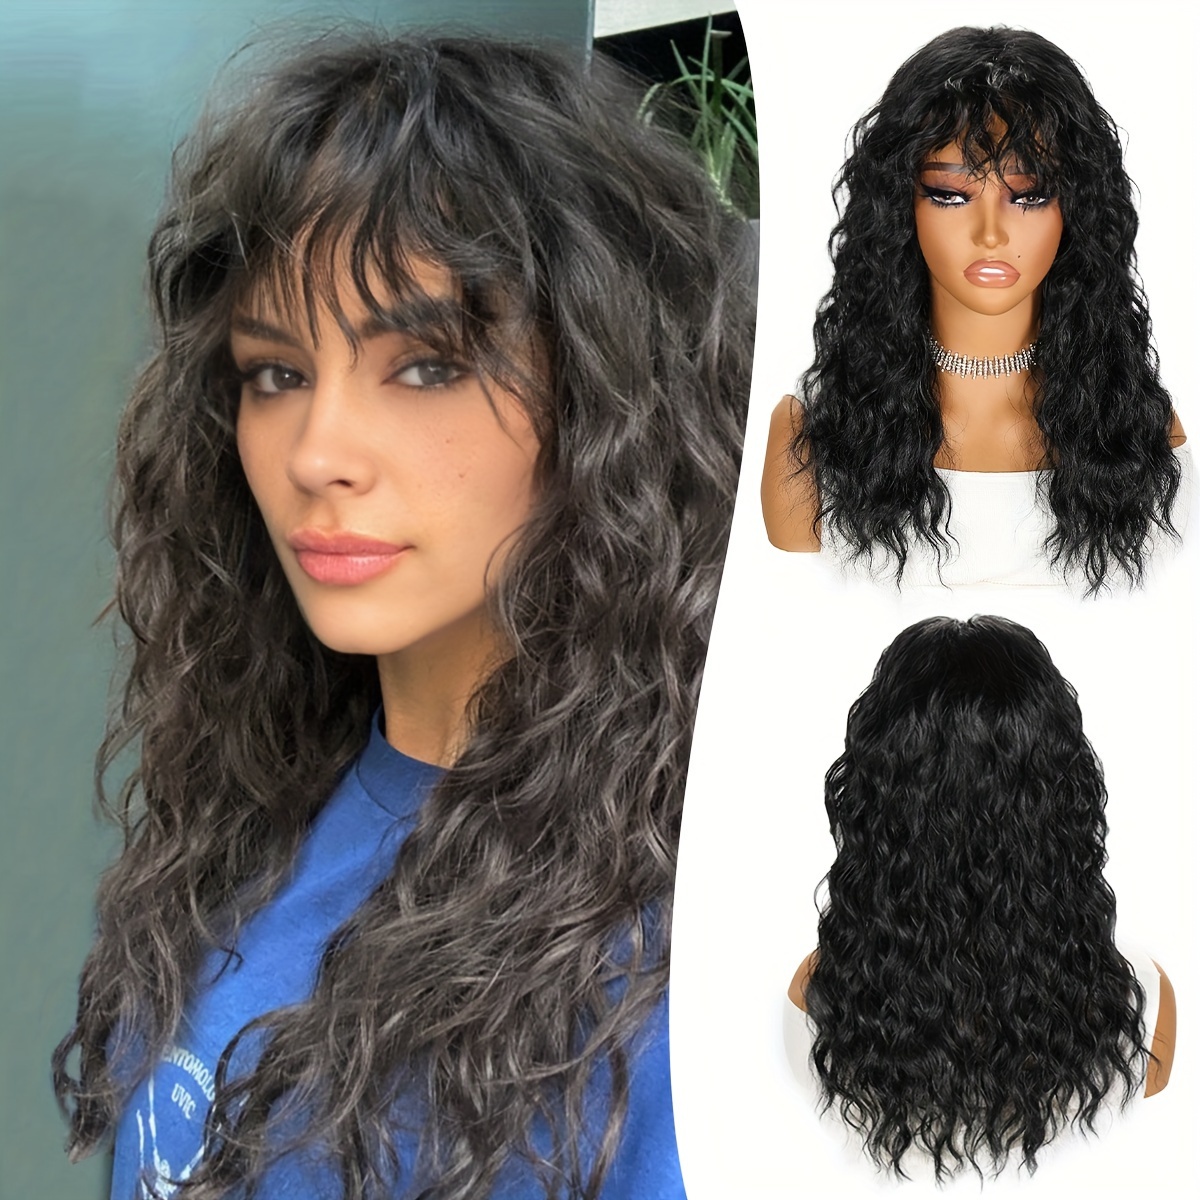 

18 Inch Long Curly Wavy Hair Wigs With Bangs Synthetic Fiber None Lace Wavy Wigs For Women